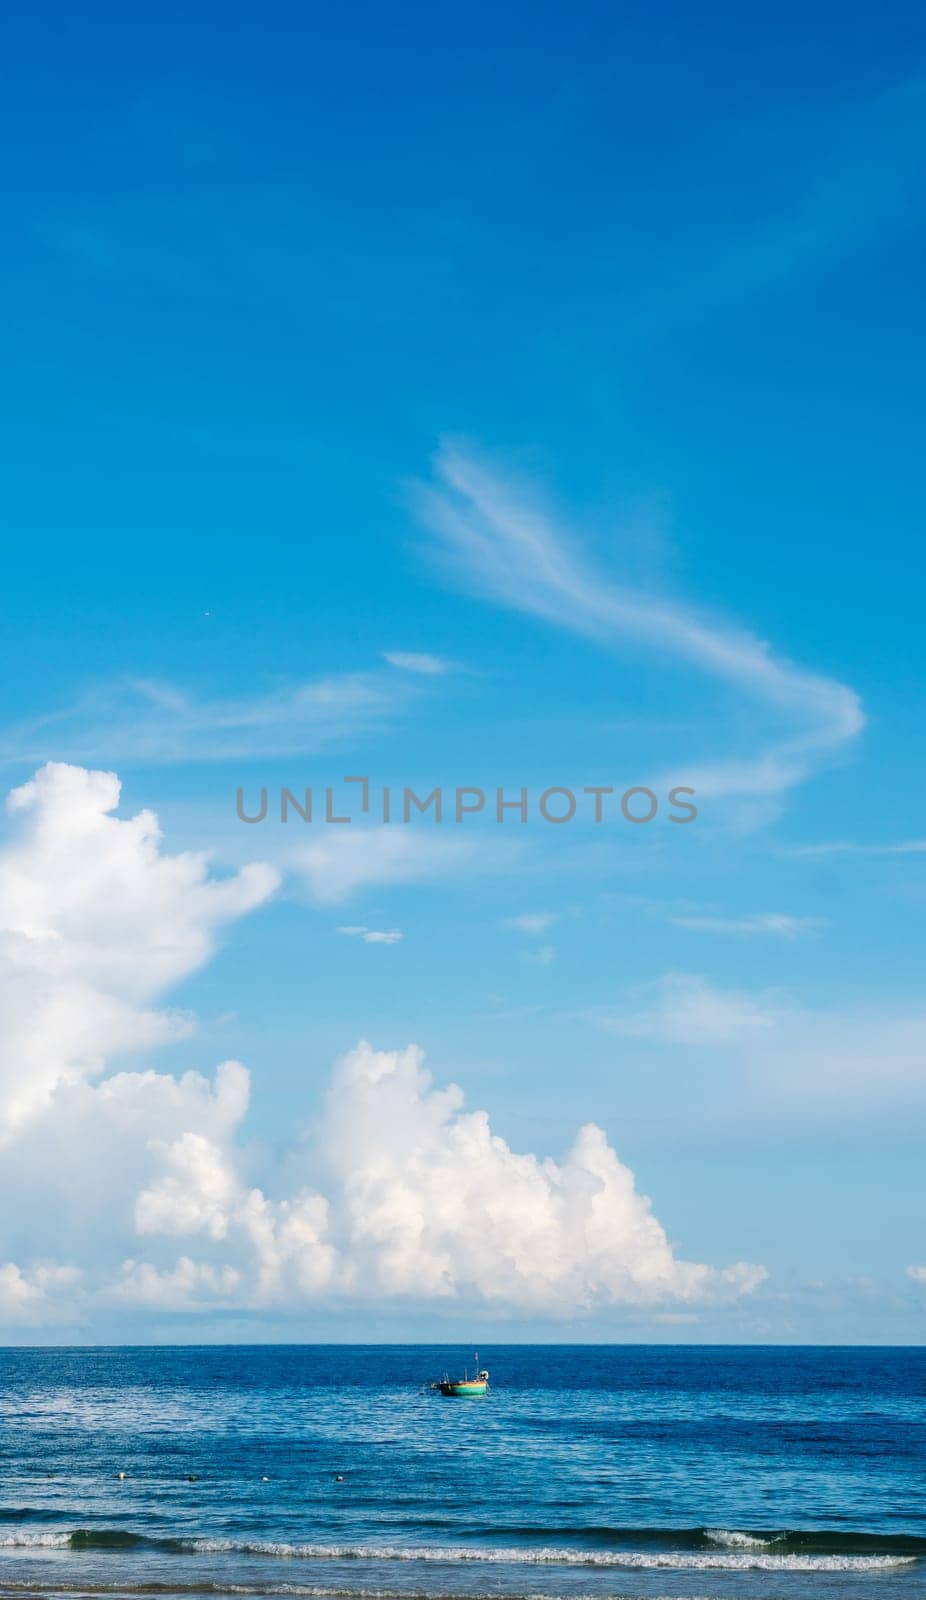 Seascape nature beauty, magic huge cumulus white clouds over blue sea, freedom happiness opportunity.